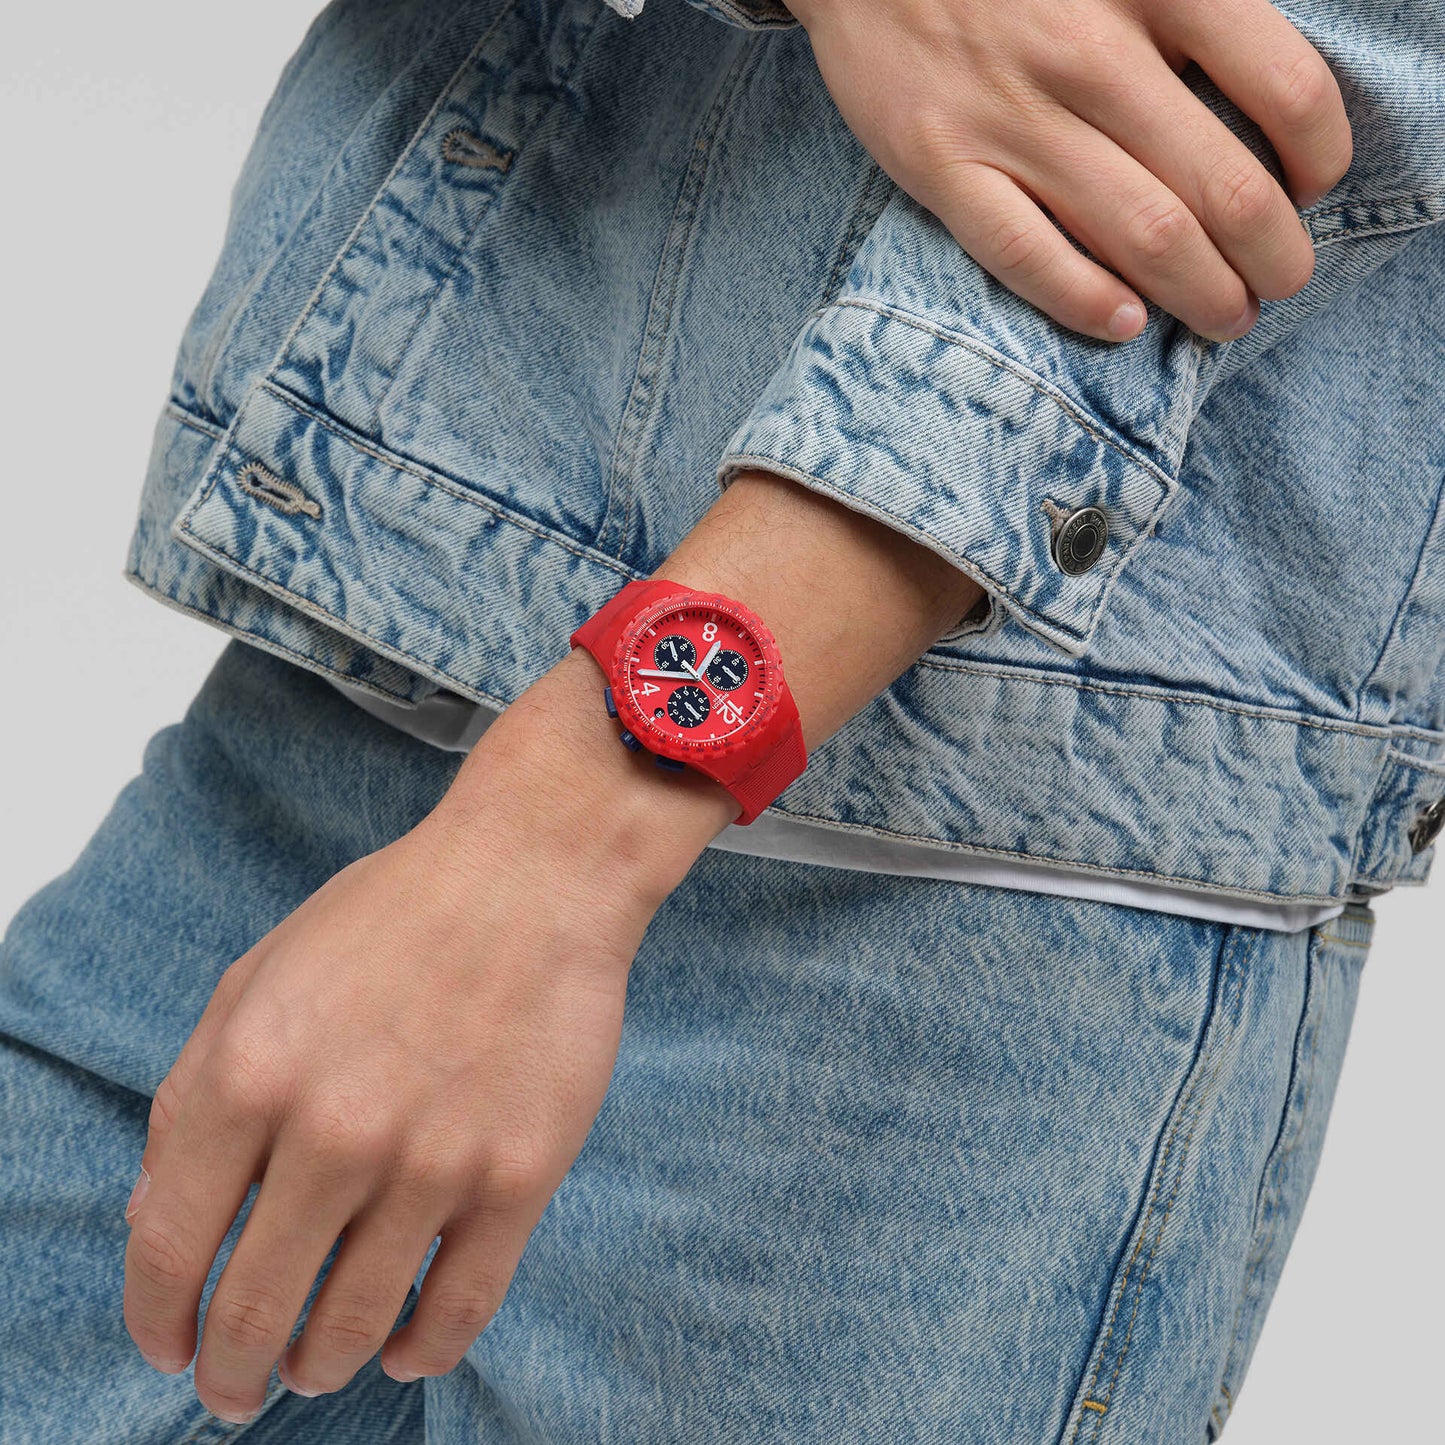 Swatch Primarily Red 42mm